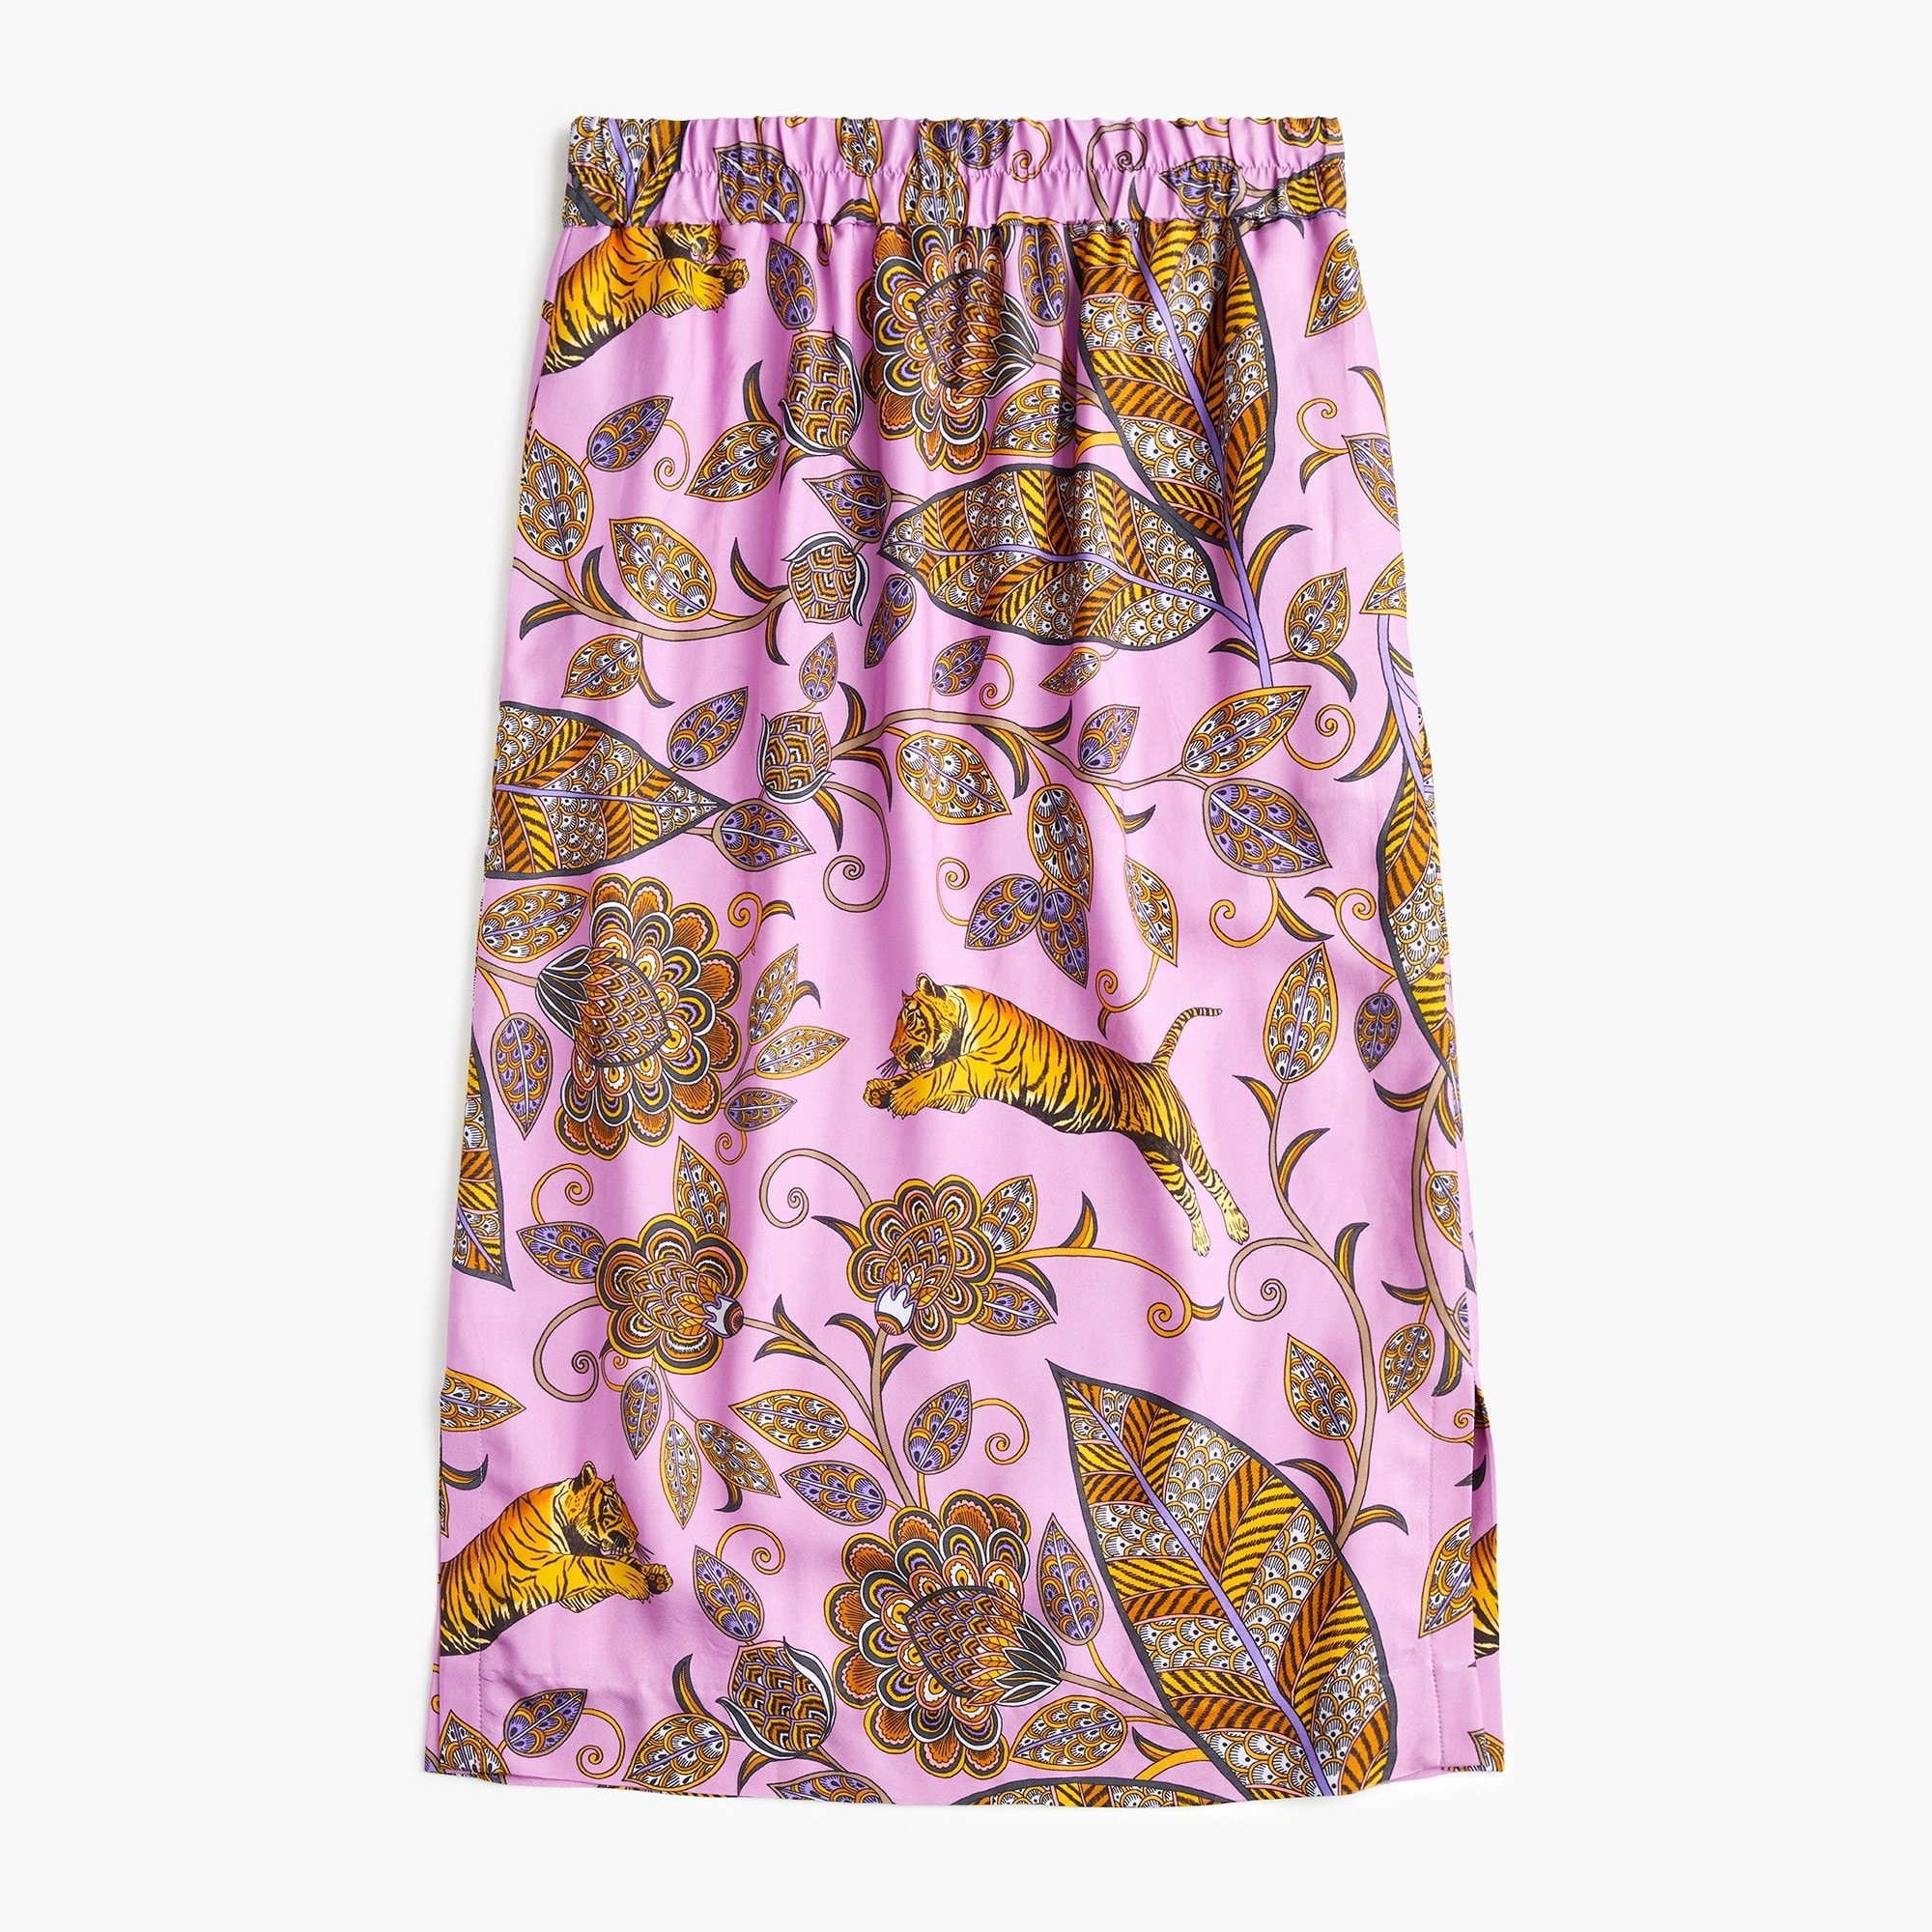 Pull-on midi skirt in tiger floral